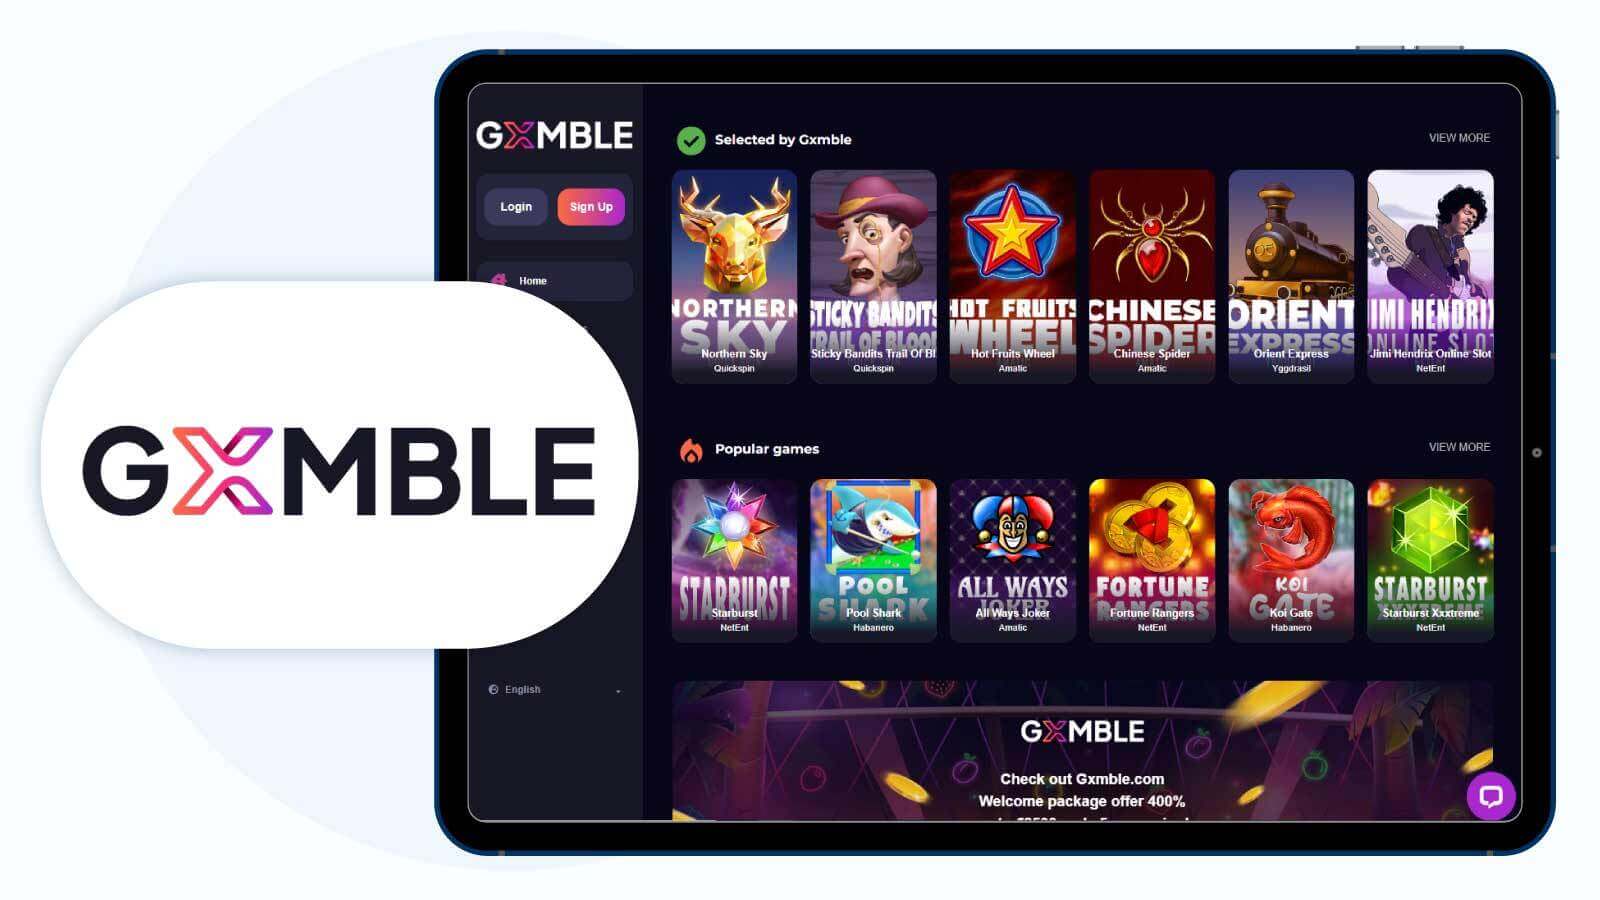 5. Gxmble Casino Best First Deposit Bonus with Low Wagering Requirements